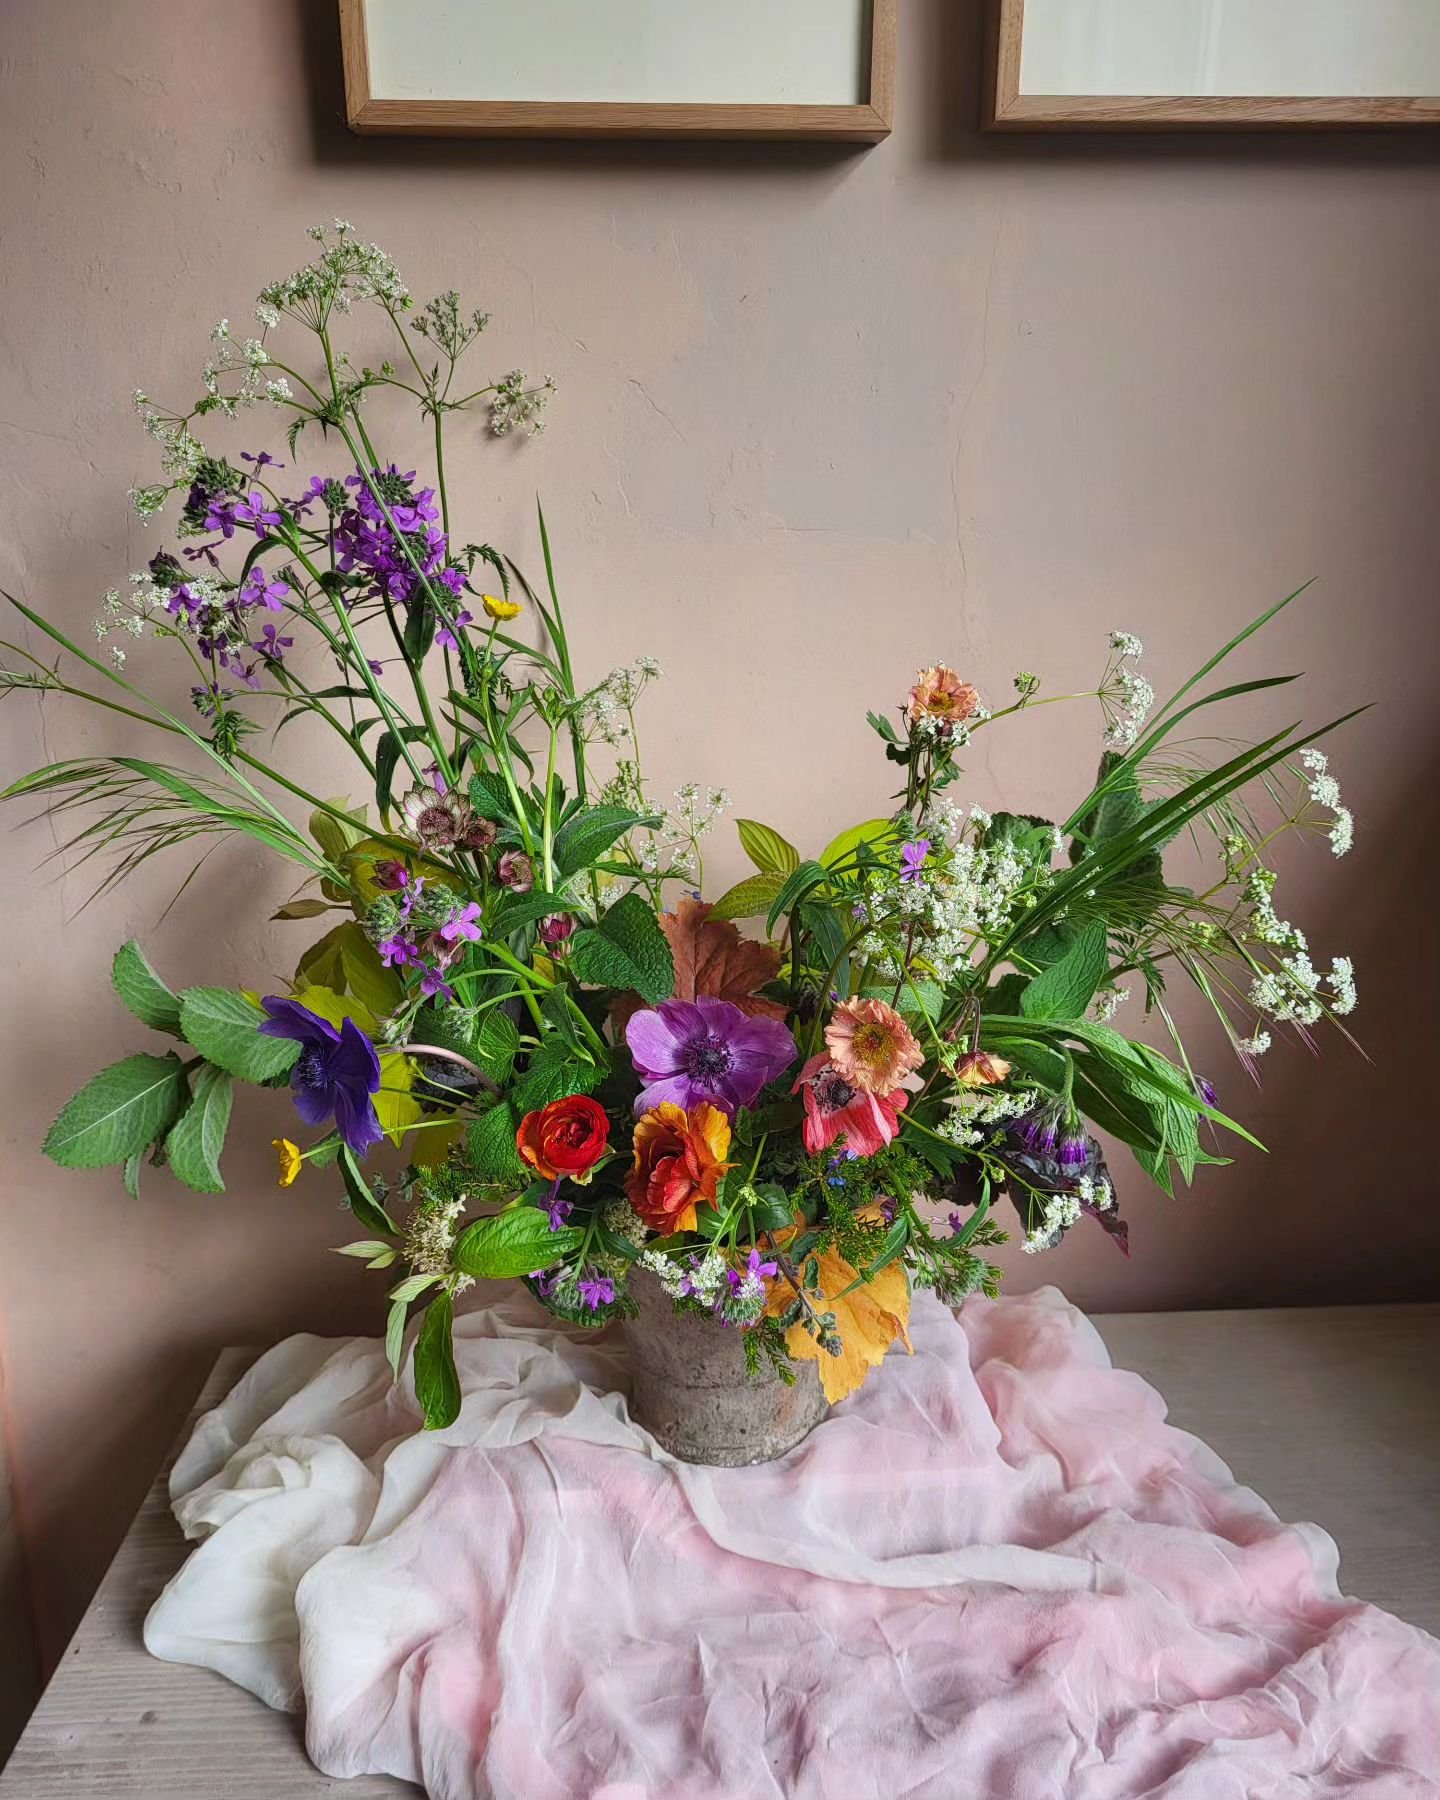 MAY// the seasonal bowl, in Manchester we're at the cowparsley anemone crossover. The ranuncs and Geum are flying away, and there's the mere whiff of astrantia on the horizon. Grown by @birchfarmflowers and a little by me. Time to make a compostible 